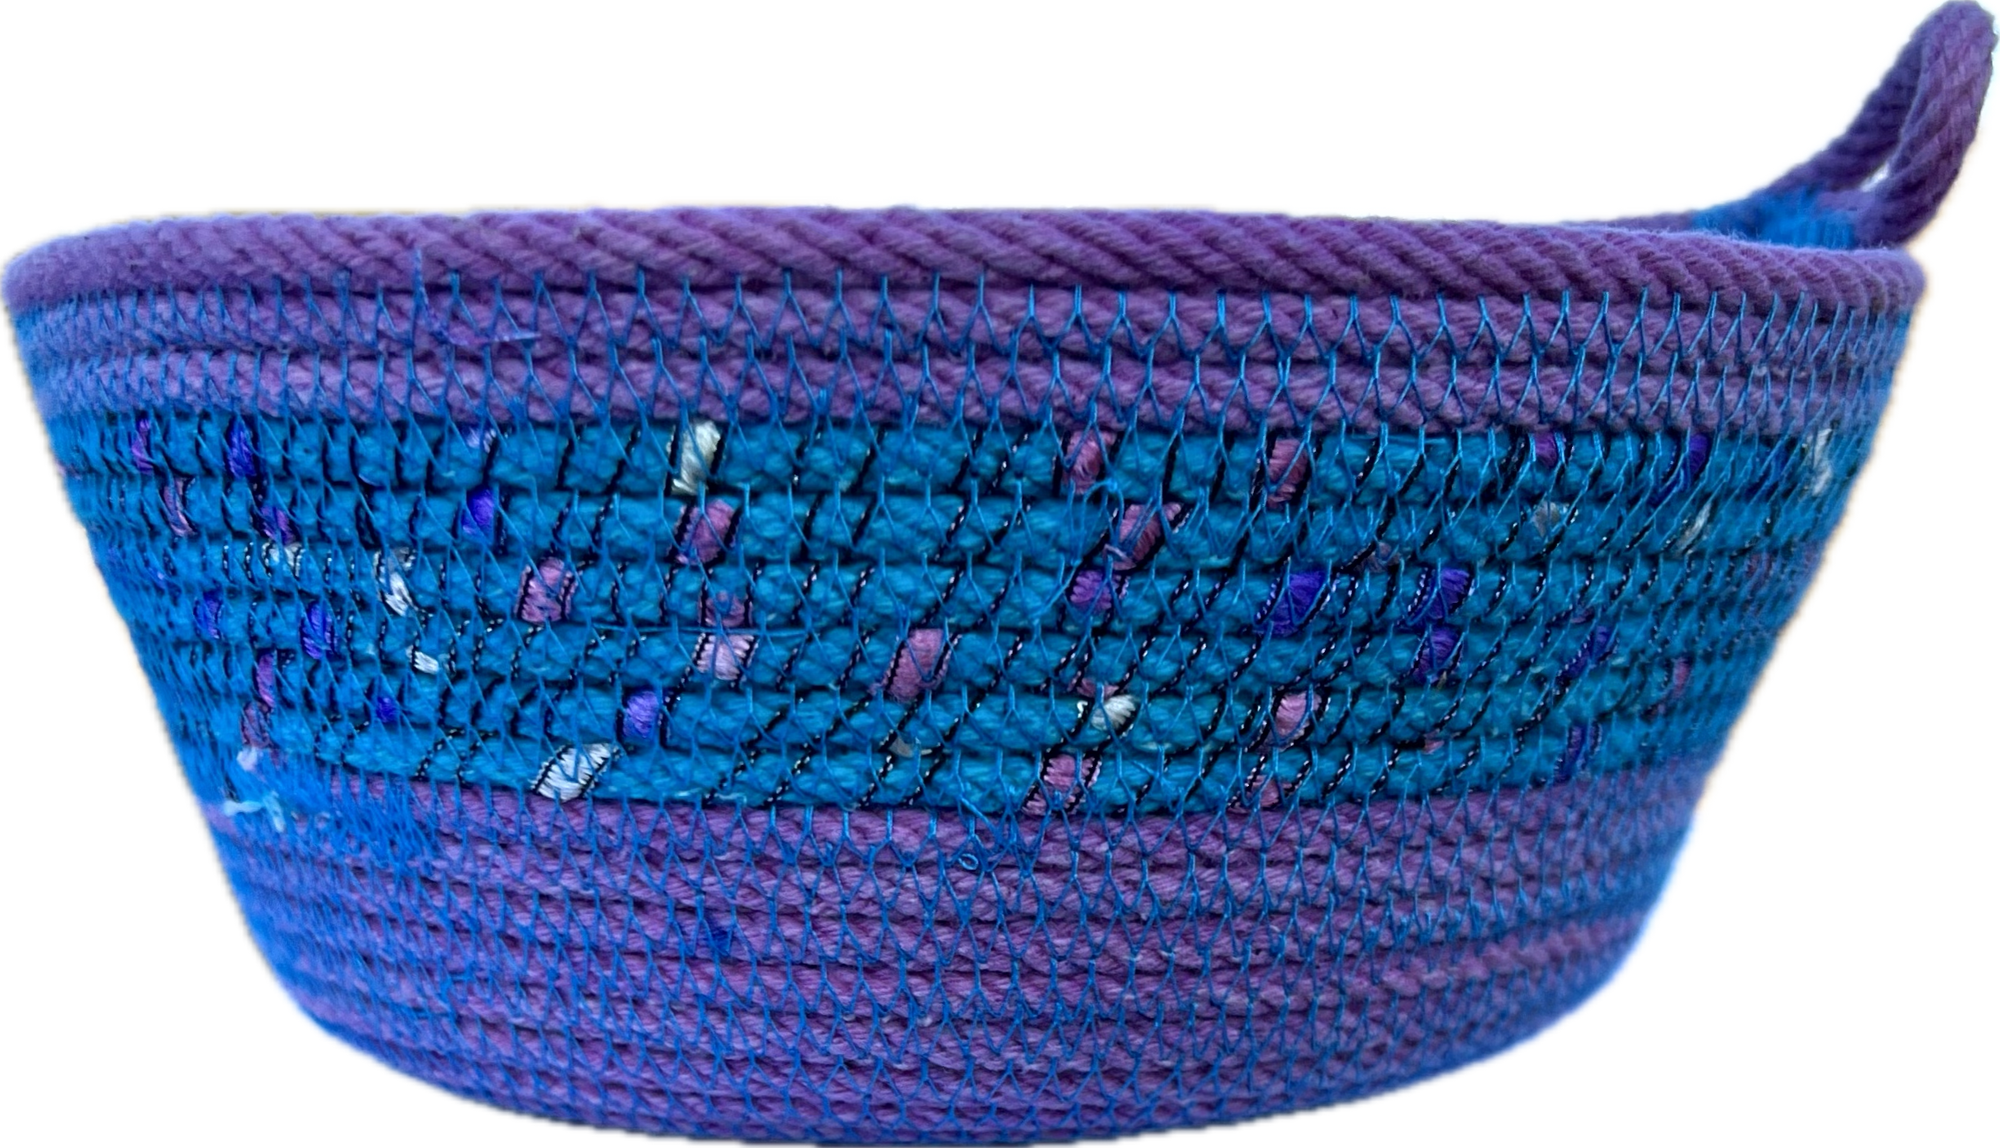 Coiled Rope Planter Lavendar and Teal